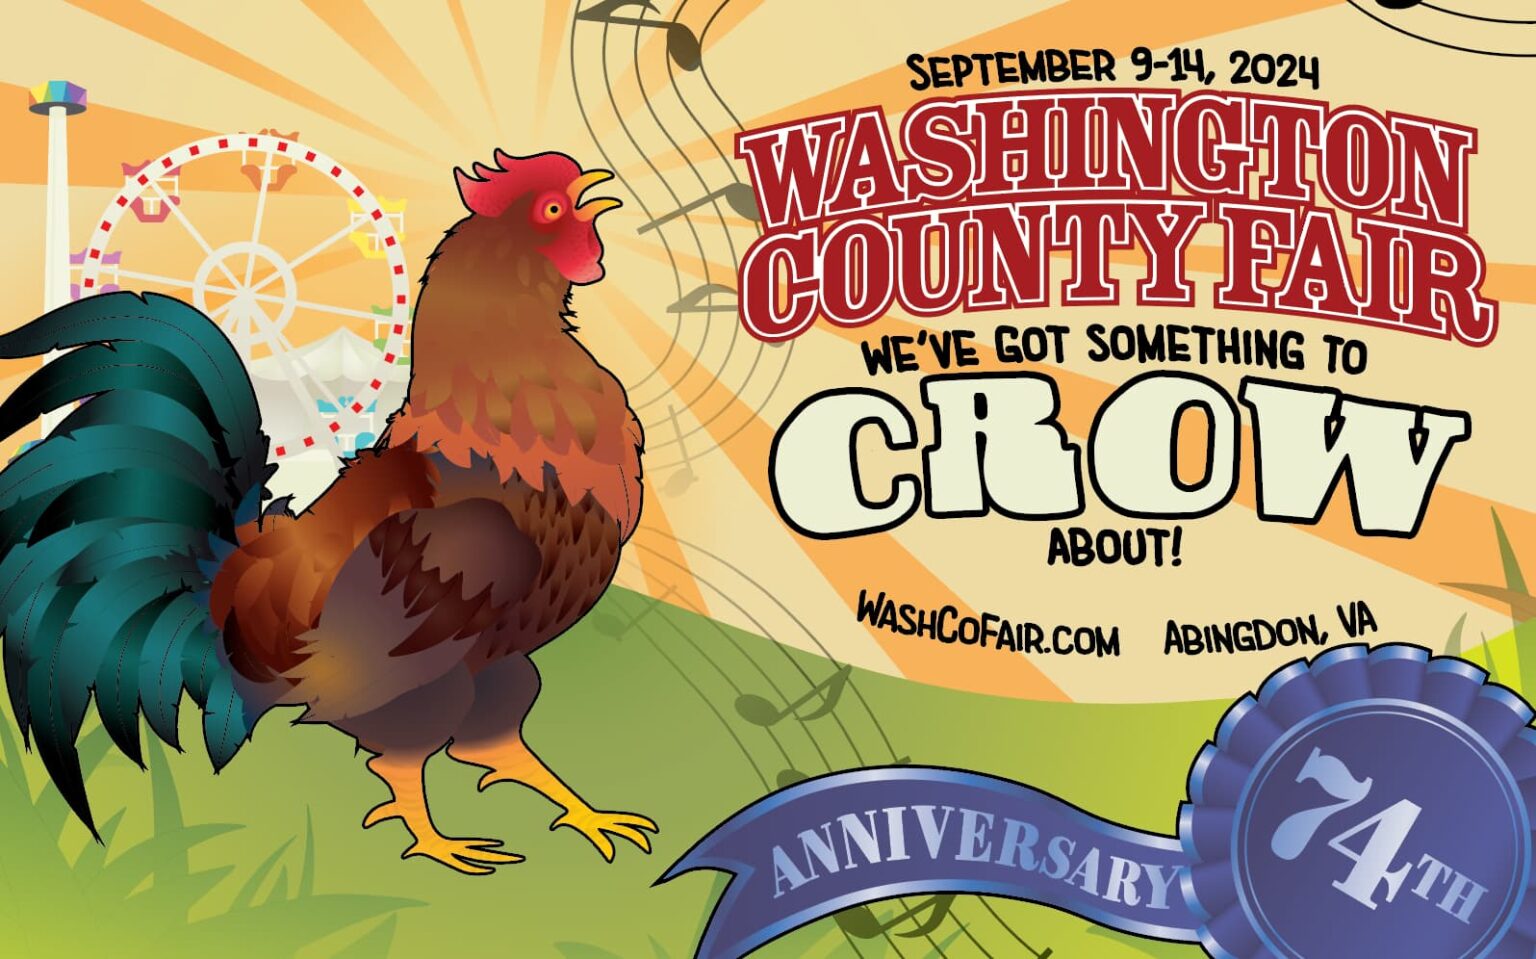 Colorful banner image for the 2024 fair themed "We've got something to Crow About". The fair returns September 9-14, 2024